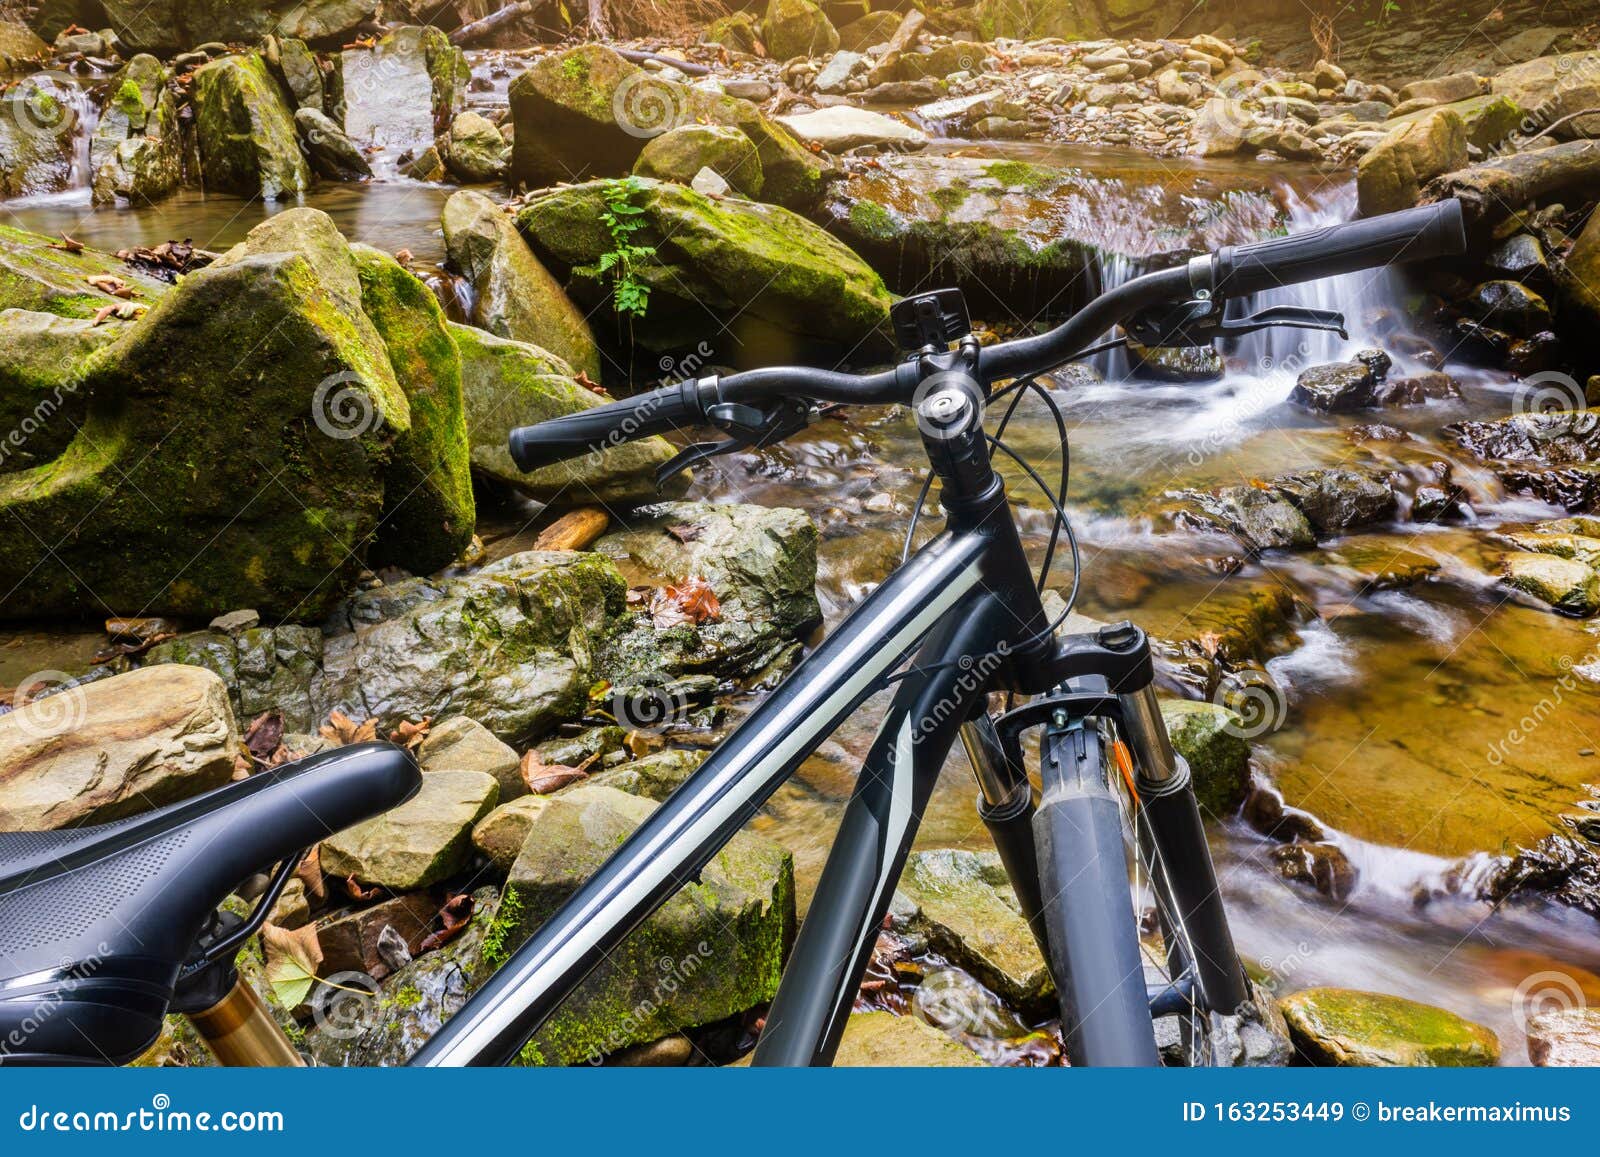 Mountain Bike Standing on a Forest River Stream Stock Image